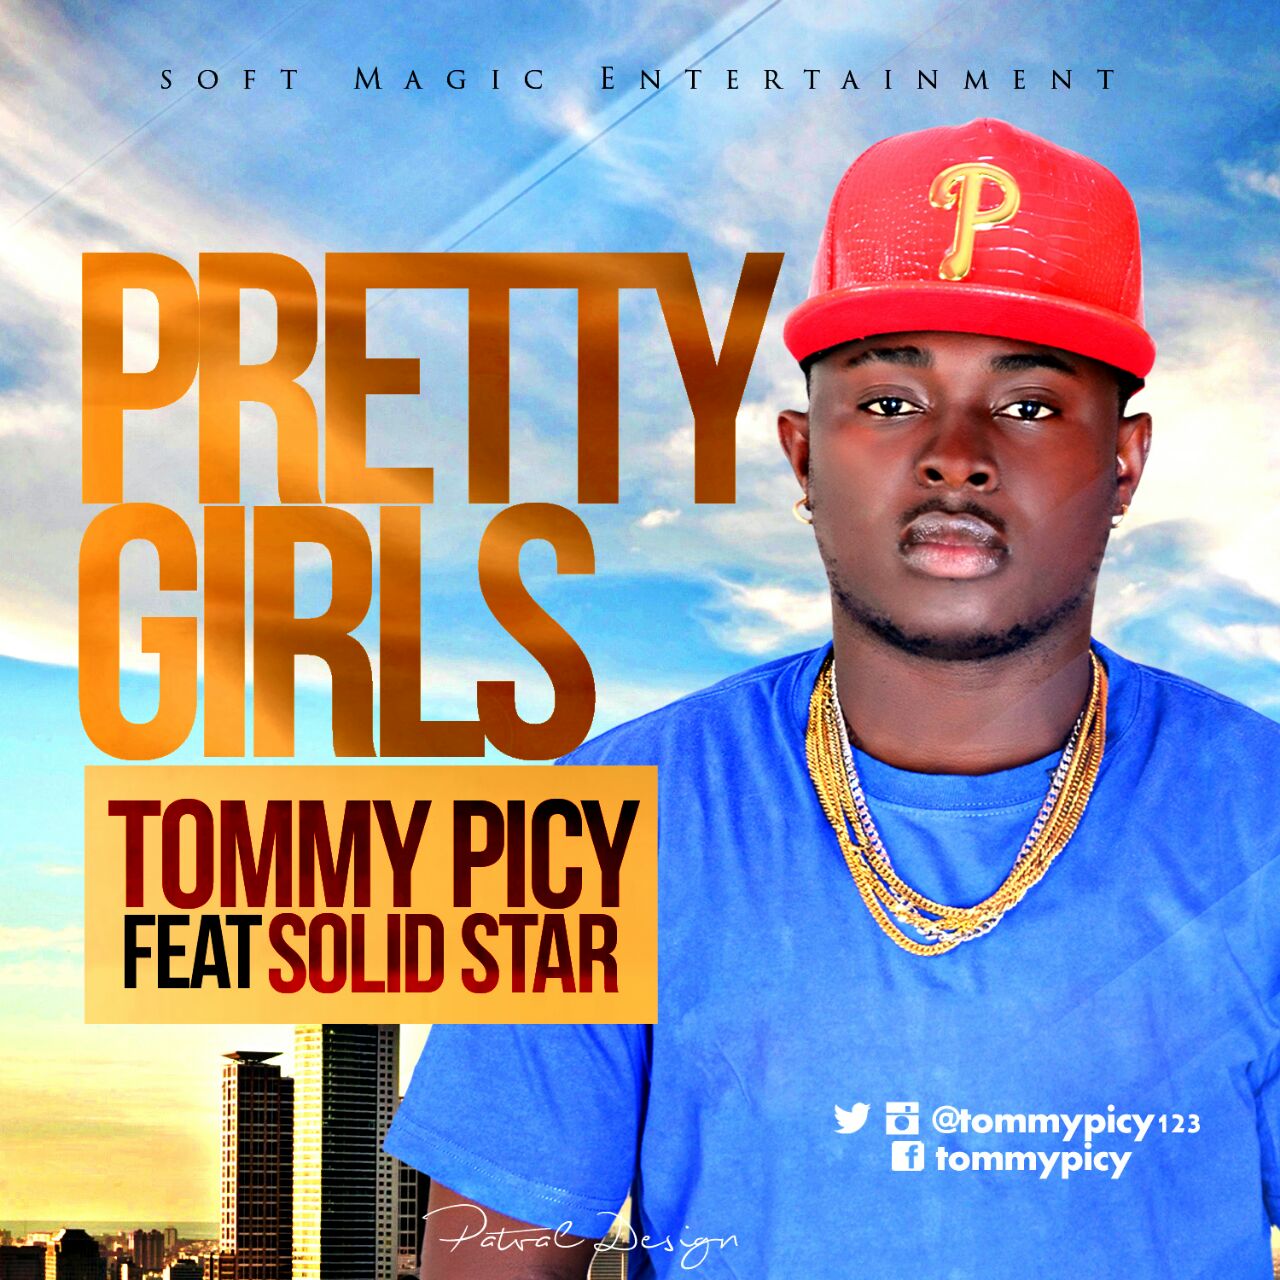 VIDEO: Tommy Picy ft. Solidstar – Pretty Girls 